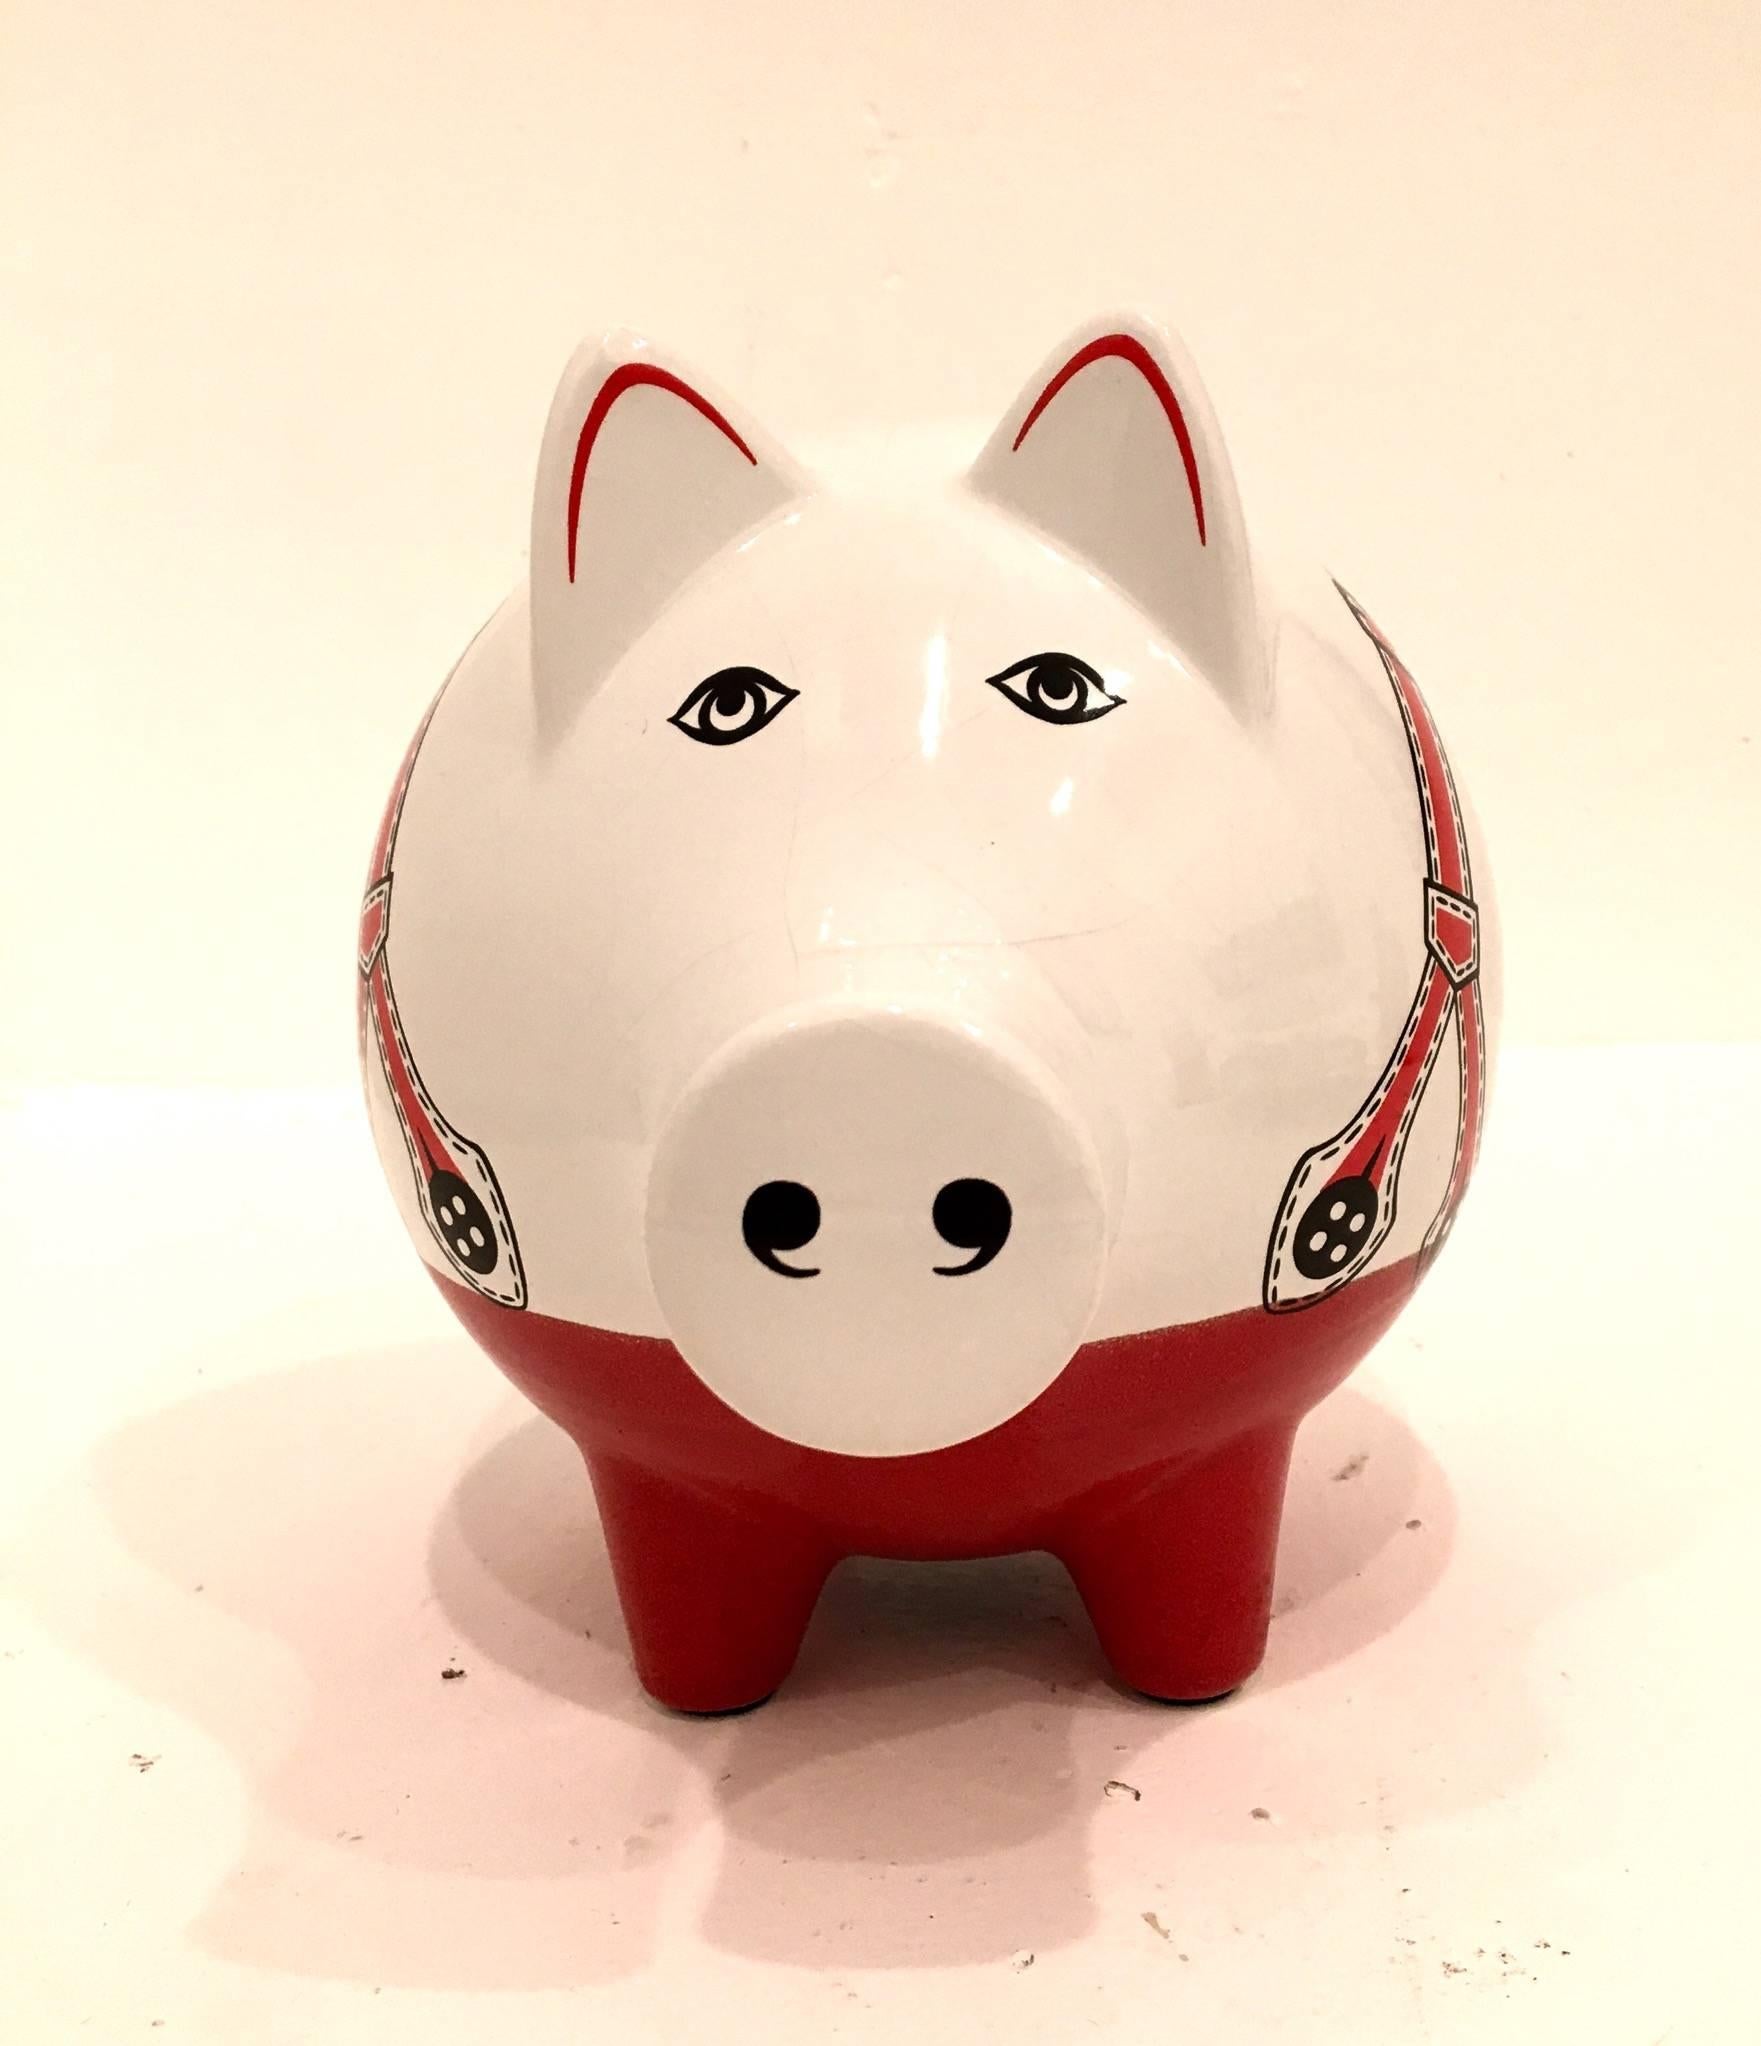 Decorative porcelain piggy bank, circa 1950s made in West Germany like new condition traditional red glaze on the bottom pants.